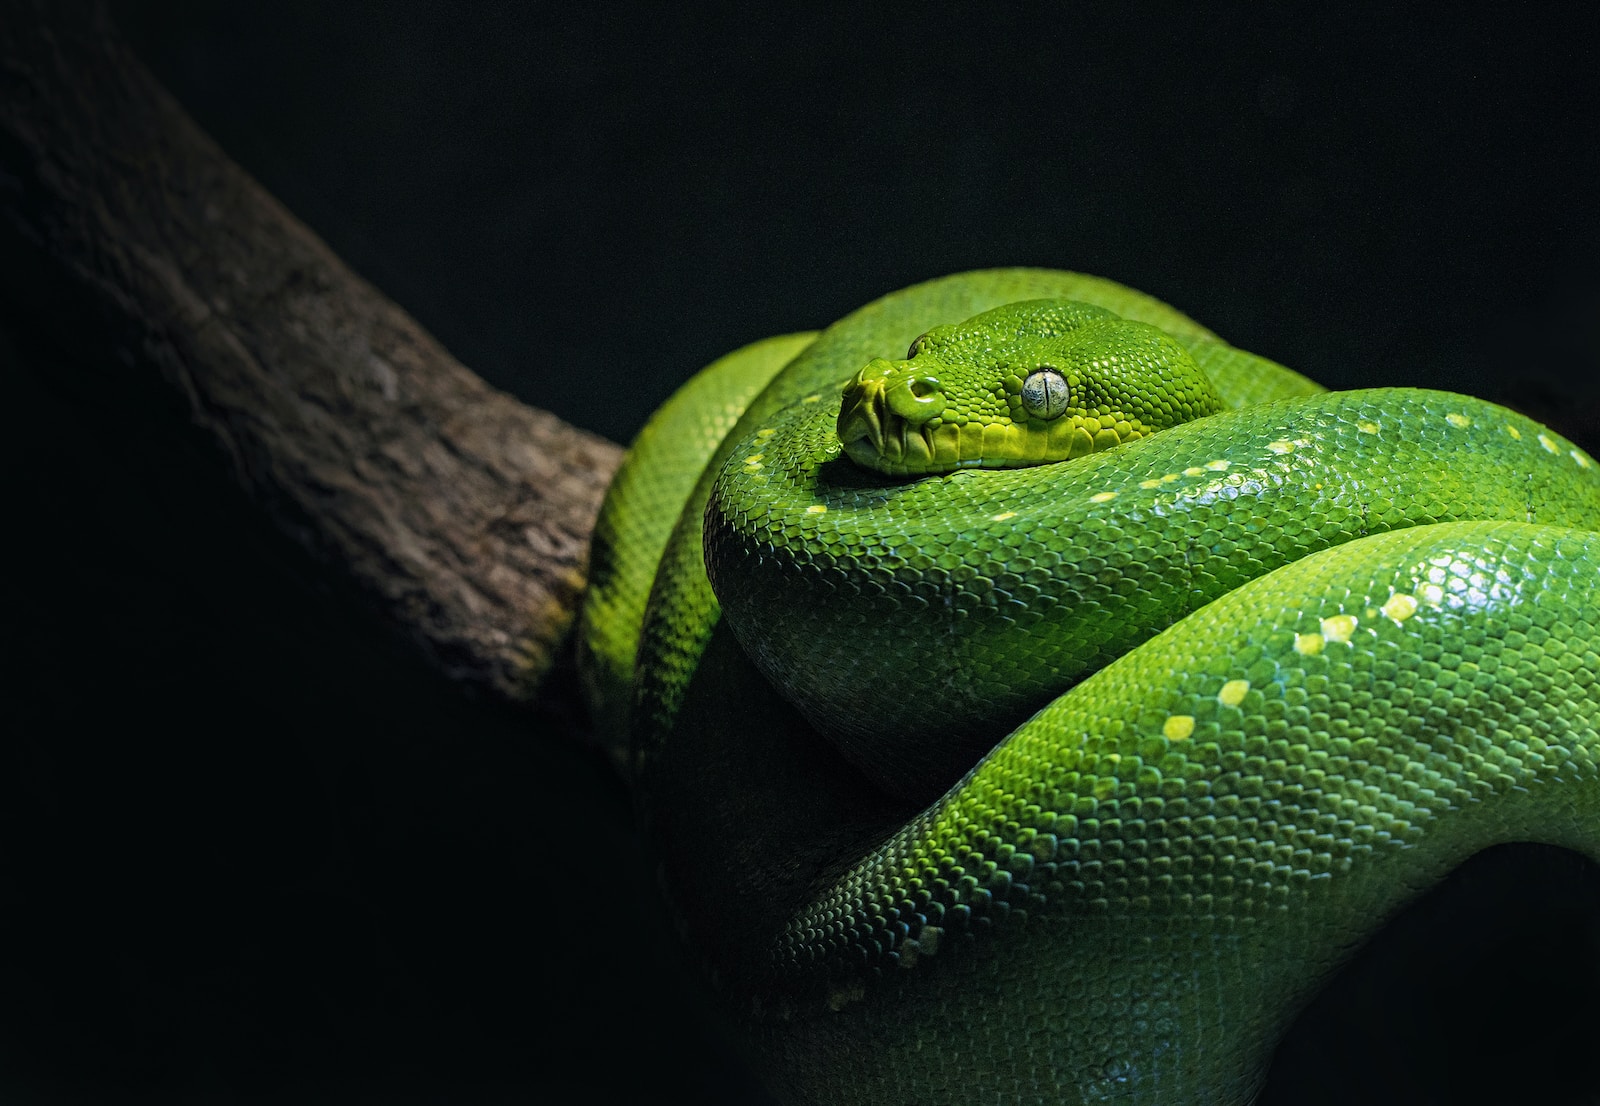 green snake on brown branch close-up photo